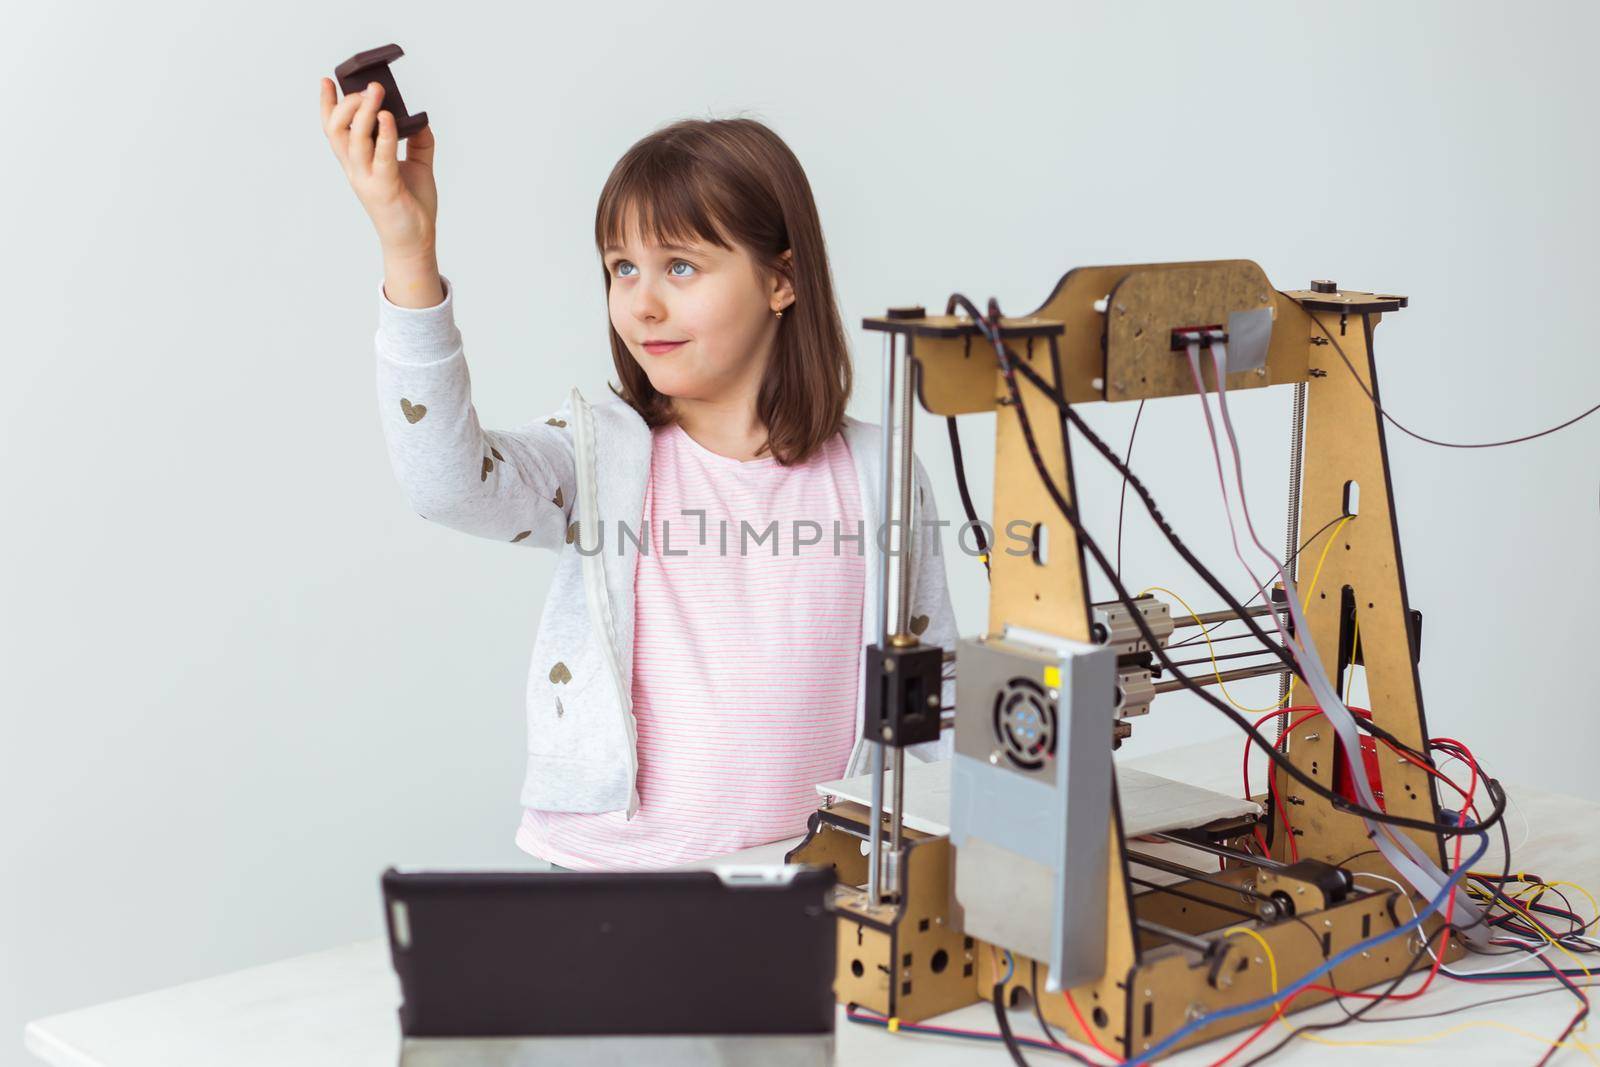 Little child architect using 3D Printer. Schoolgirl, technologies and study concept. by Satura86